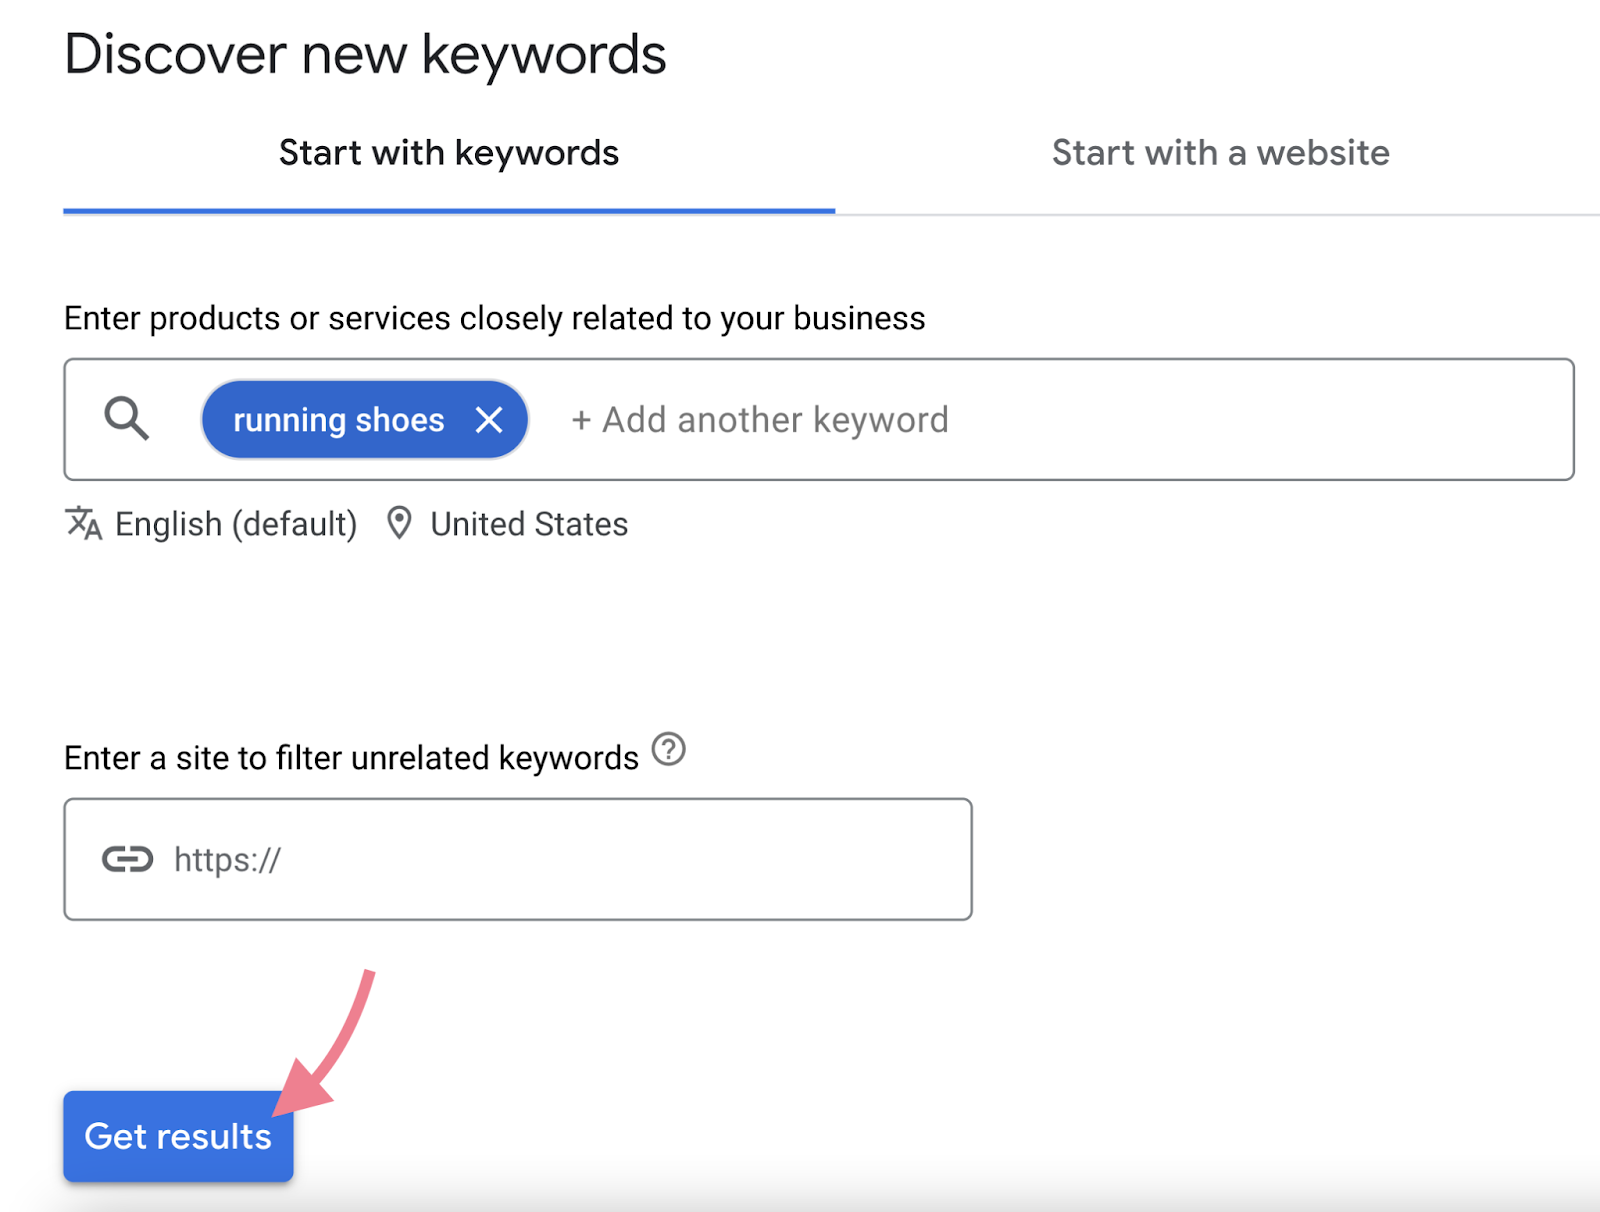 Discover new keywords page